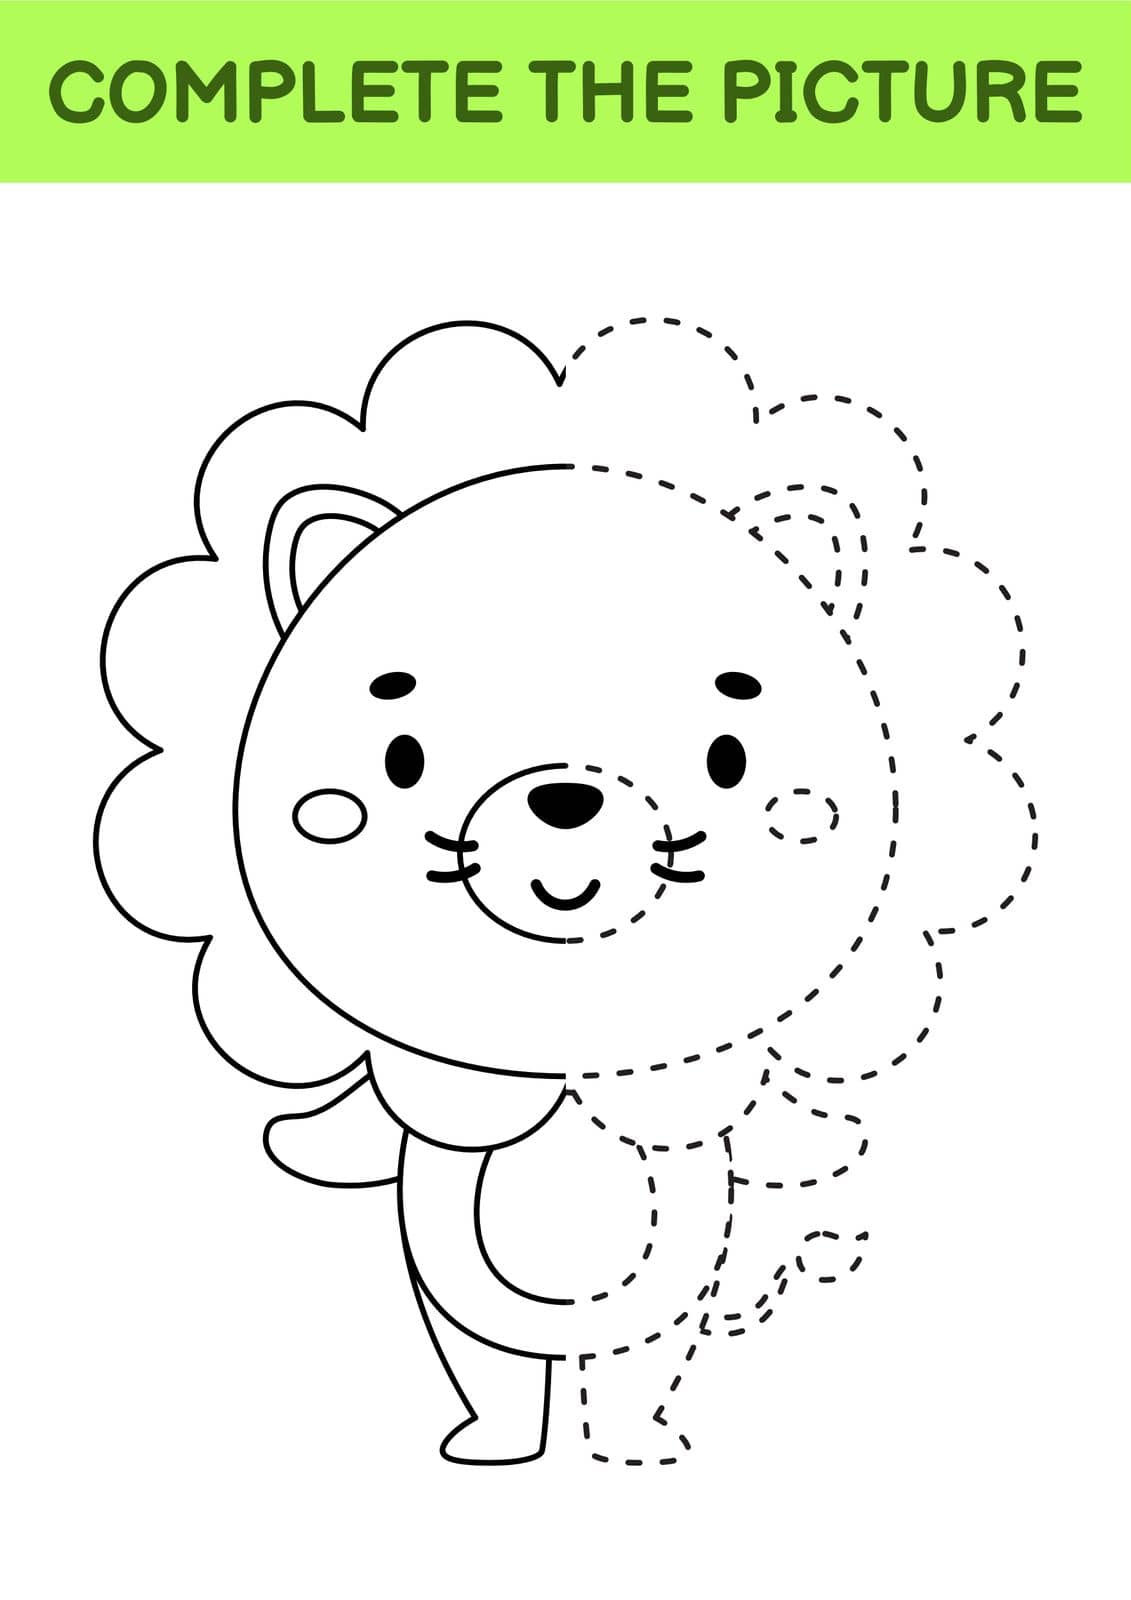 Complete drawn picture of cute lion. Coloring book. Dot copy game. Handwriting practice, drawing skills training. Education developing printable worksheet. Activity page. Vector illustration